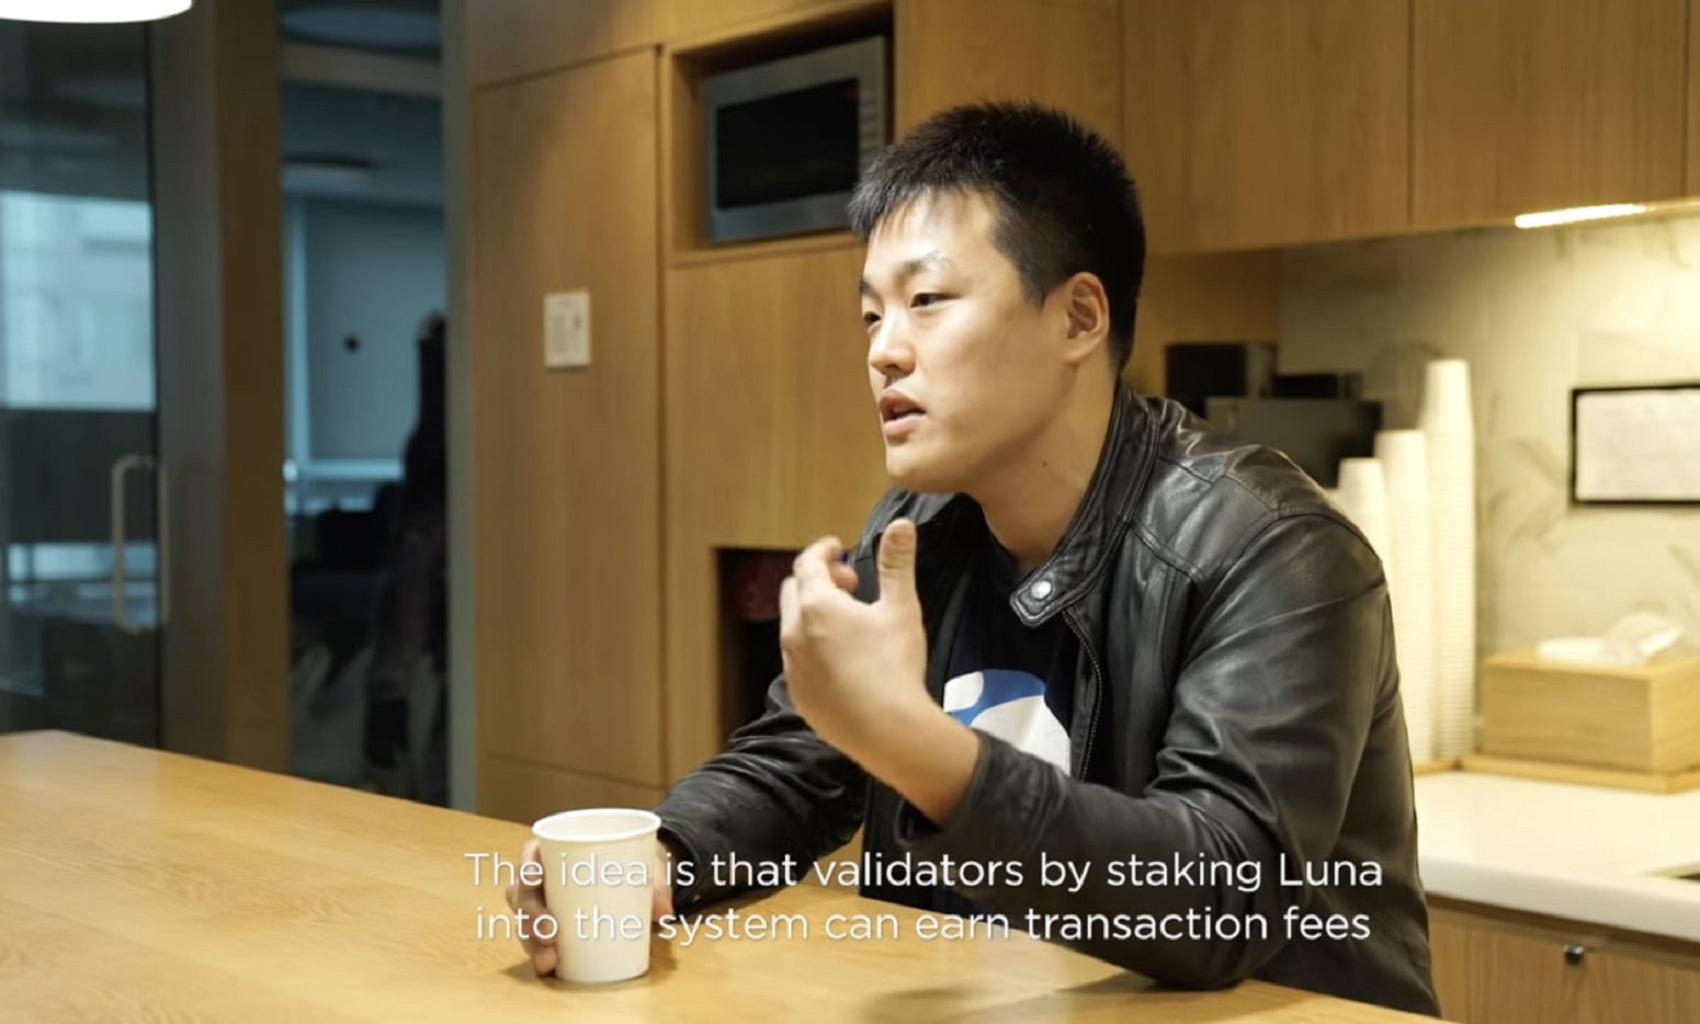 The Terraform CEO Do Kwon, sitting at a table.